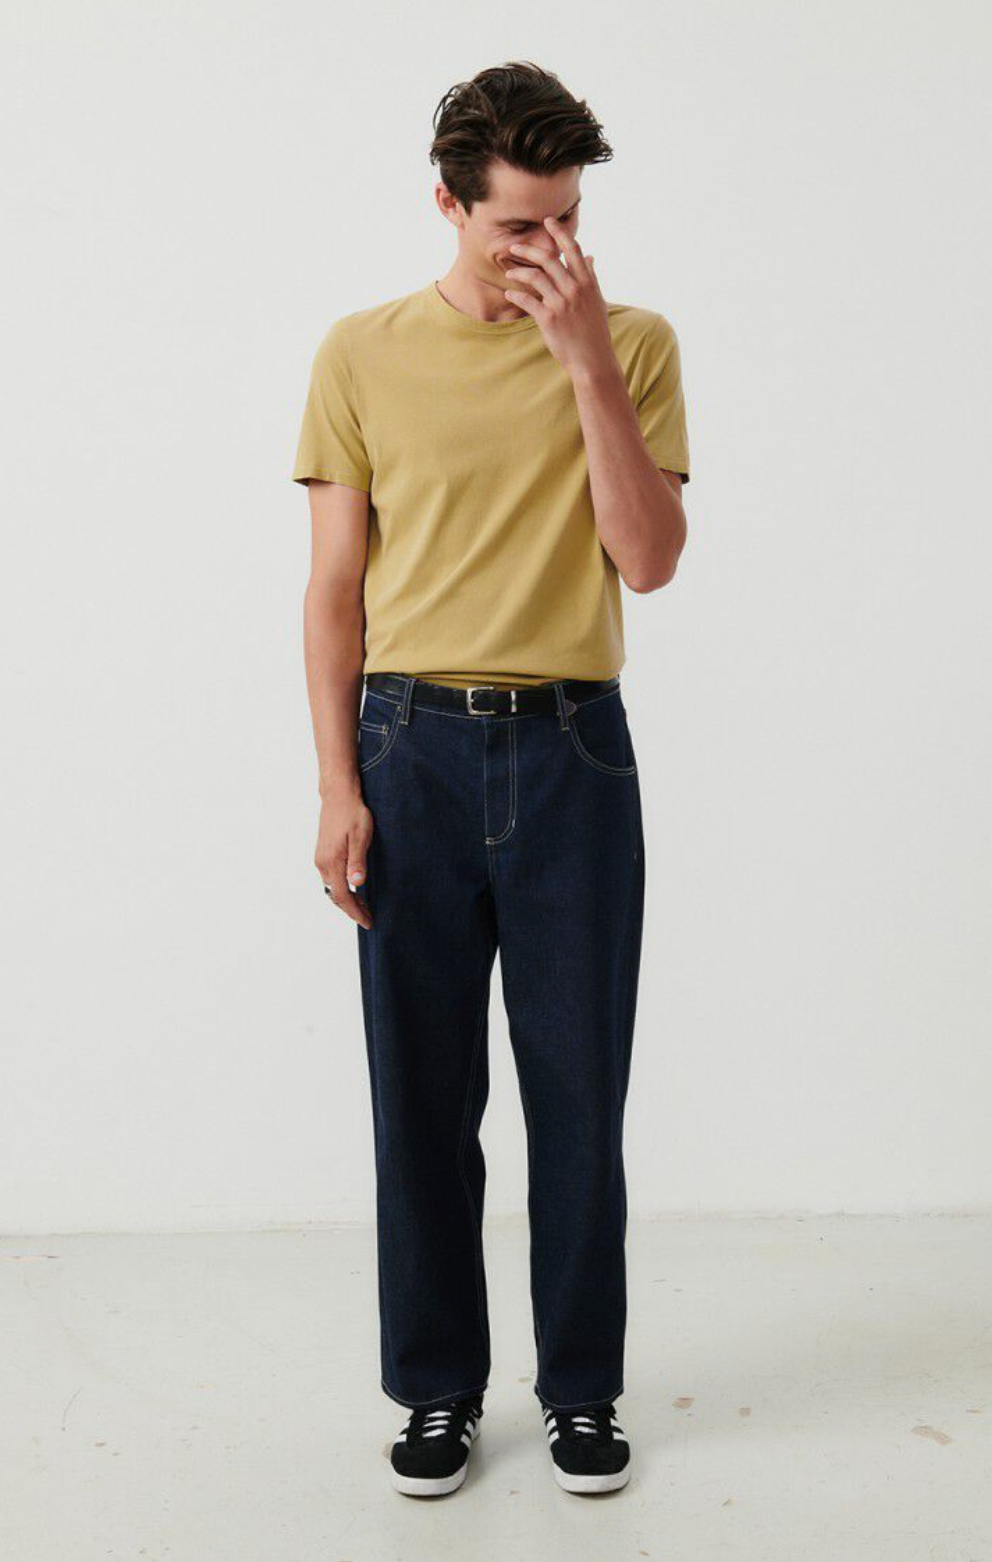 A full body front facing image of a male model wearing the Devon t-shirt in vintage safari tucked into dark denim